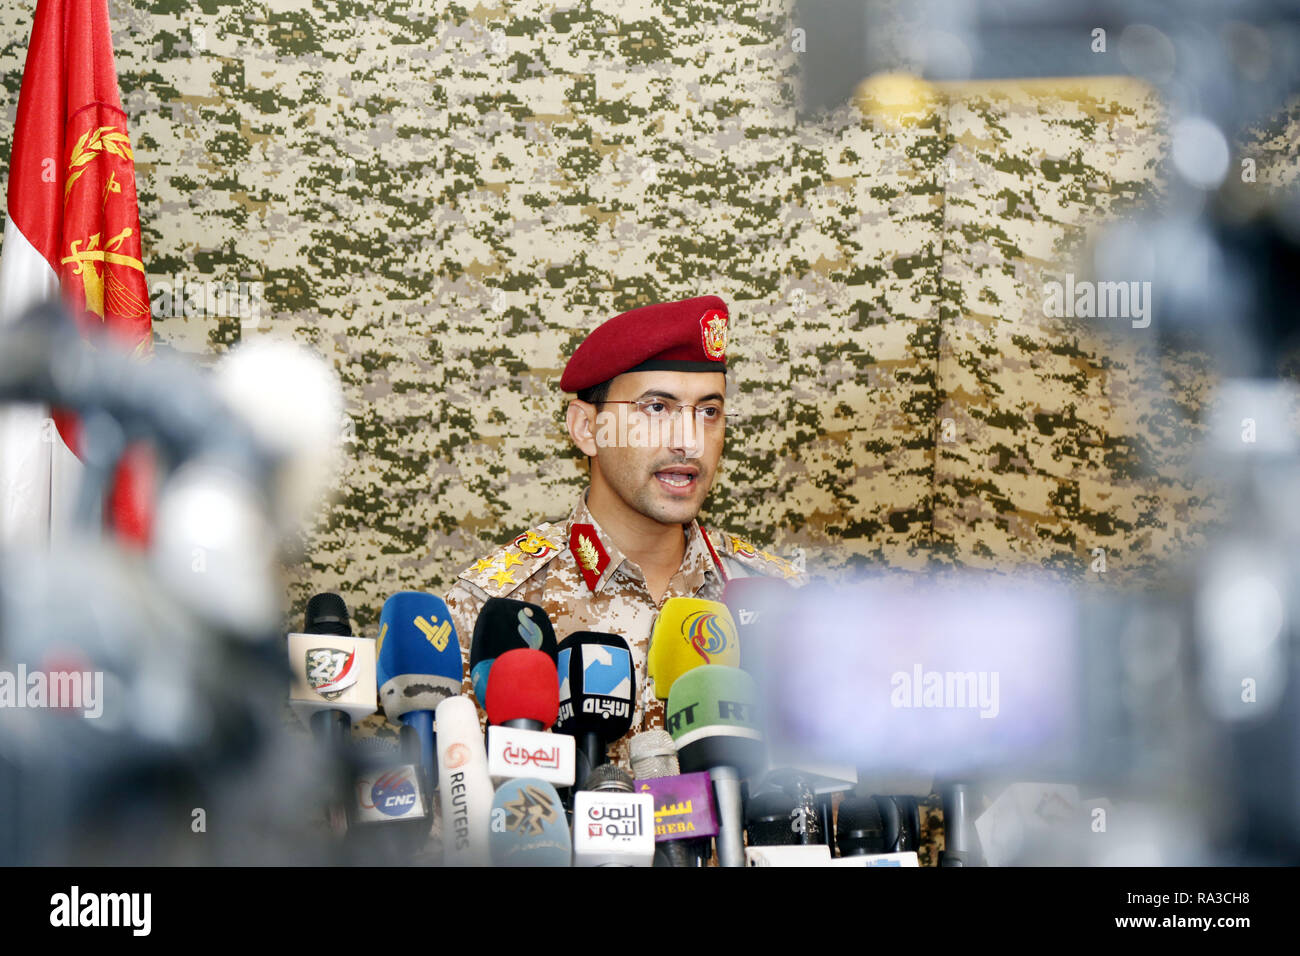 Beijing, Yemen. 31st Dec, 2018. Spokesperson of the Houthi rebels Yahya Sarie speaks during a press conference in Sanaa, Yemen, Dec. 31, 2018. Yemen's rival forces on Monday traded accusations of breaching a UN-brokered ceasefire in flashpoint Red Sea port city of Hodeidah. Credit: Mohammed Mohammed/Xinhua/Alamy Live News Stock Photo